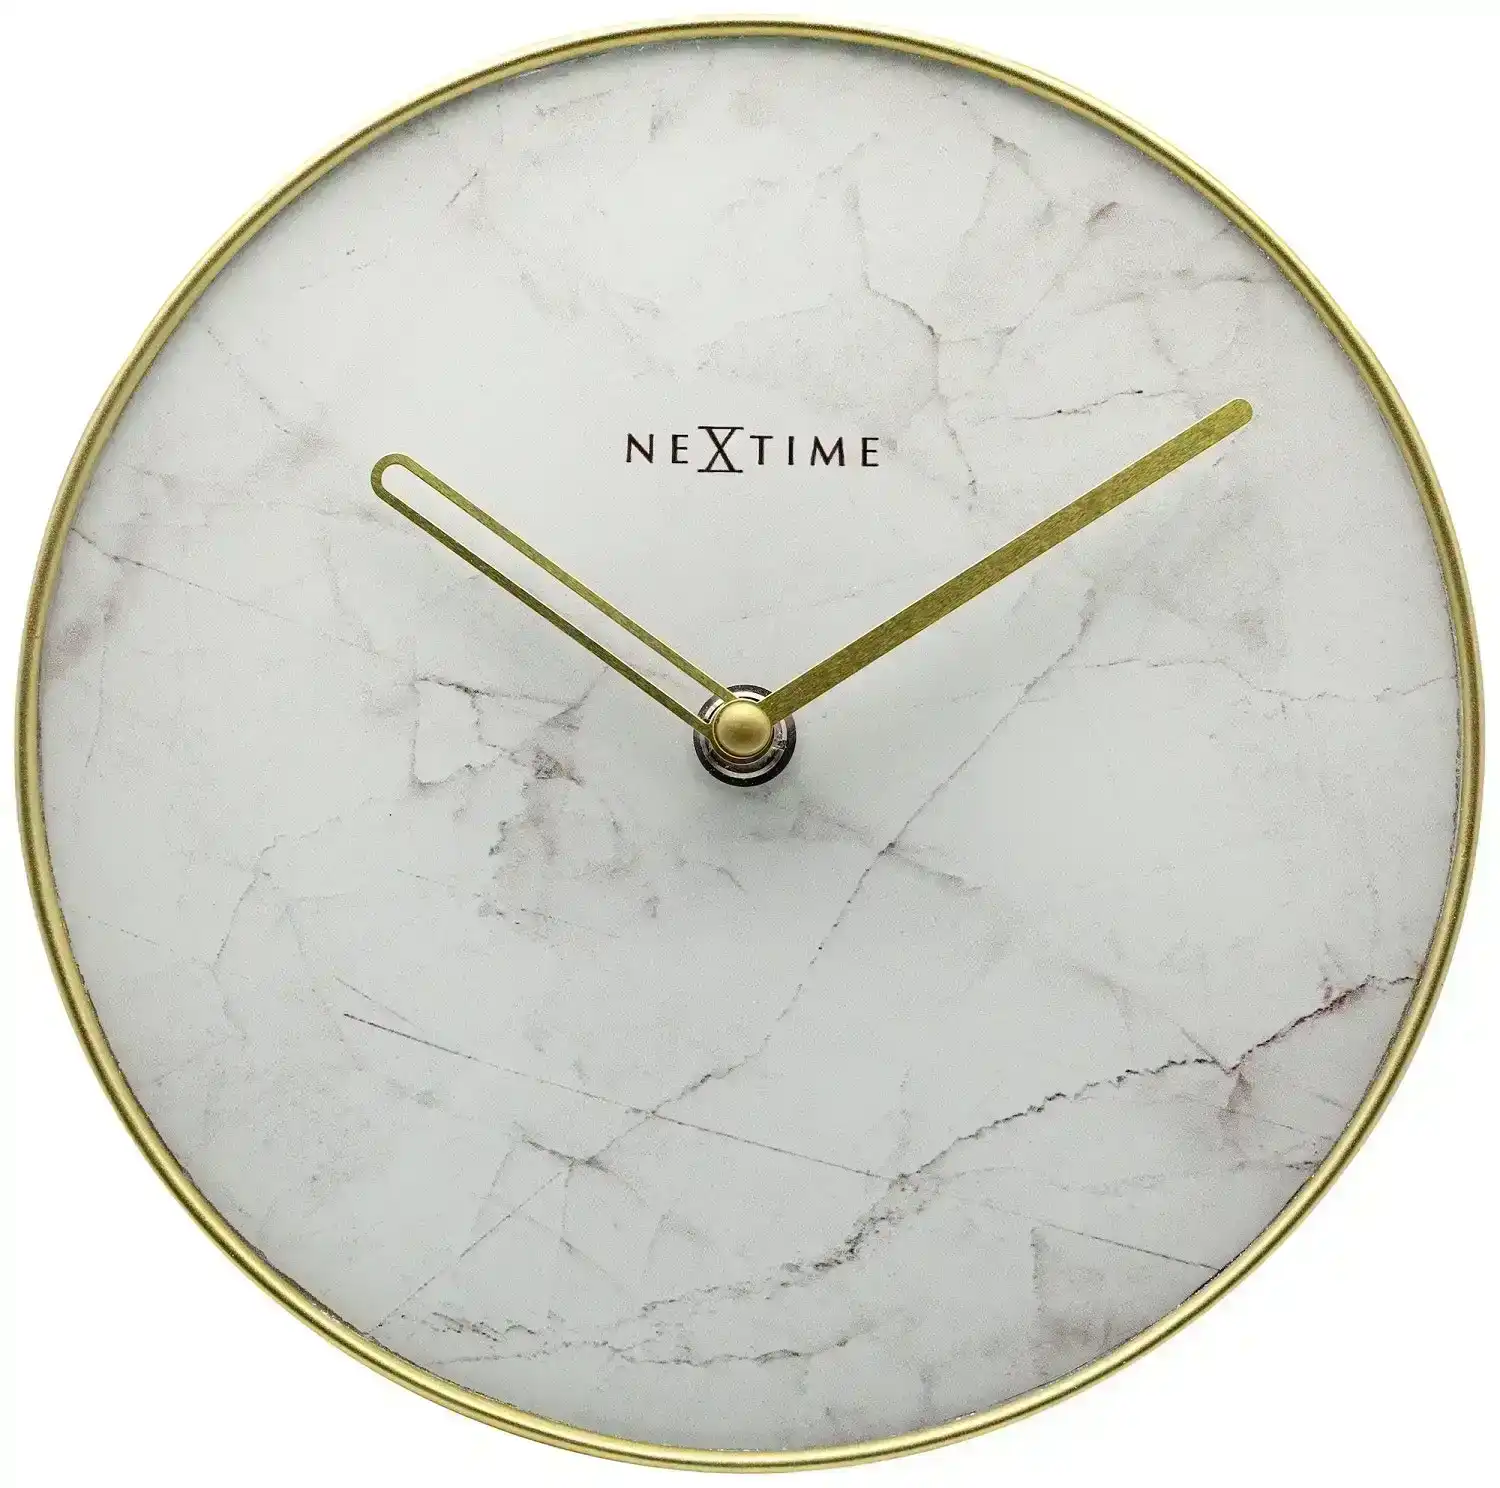 NeXtime 20cm Marble Table/Desk Round Analogue Clock Home/Office Decor White/Gold